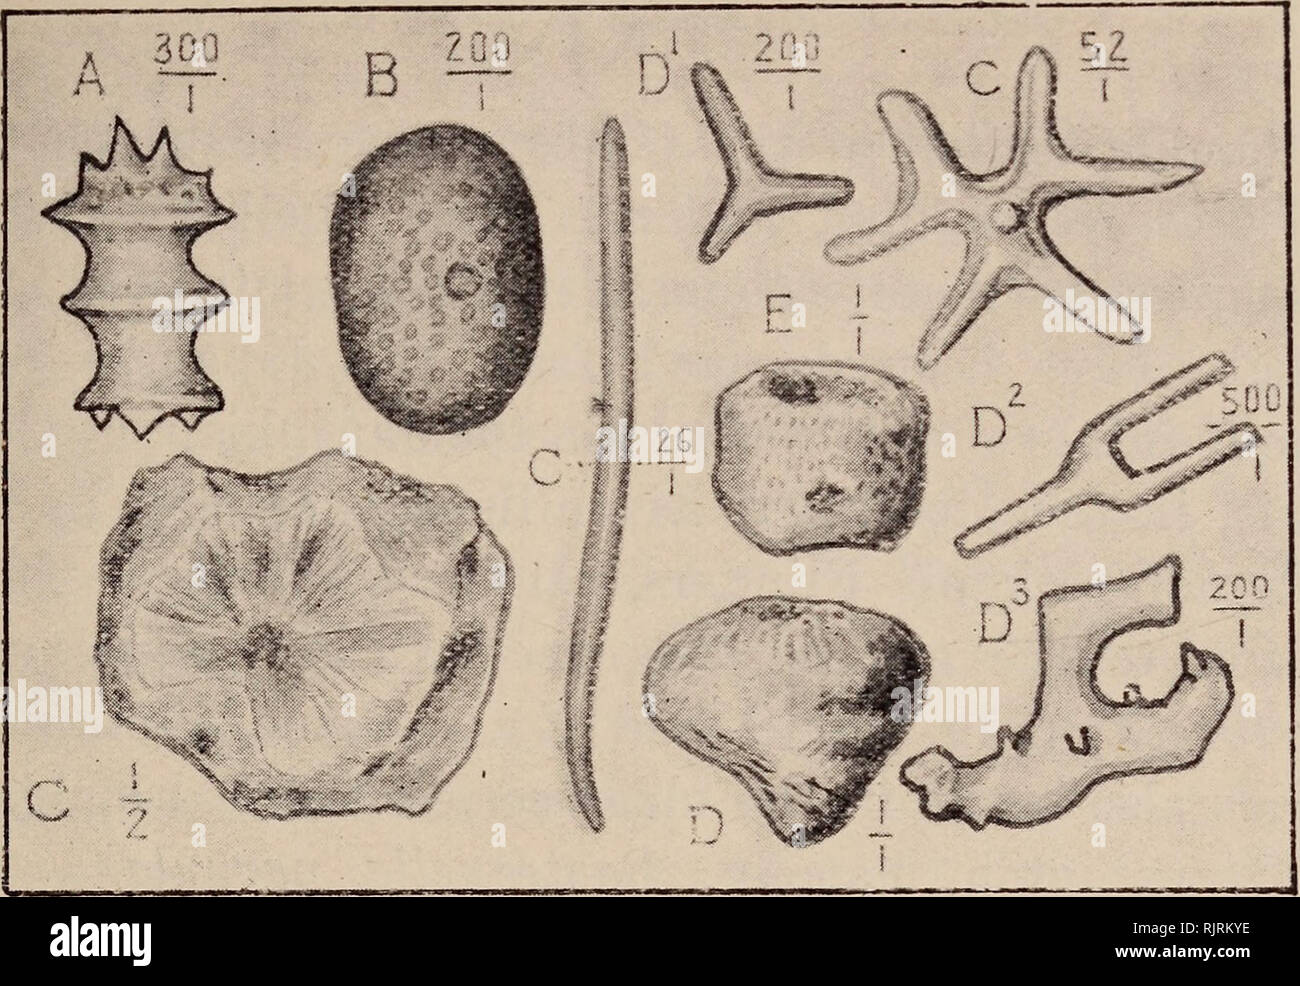 . Australasian fossils, a students' manual of palaeontology. Paleontology. rig. 68.—CAINOZOIC SPONGES.. A—I^atrunculia sp. (after Hinde). Cainozoic. Deep L,ead, Norseman, W.A. B—Geodiasp. (afterHinde). Cainozoic. DeepI^ead, Norseman, W.A C—Ecionema newberyi. McCoy sp. Cainozoic. Boggy Creek, Gippsland. Vict. D—Plectroninia halli, Hinde. Cainozoic (Janjukian). Moorabool, Vict. E—Tretocalia pezica, Hinde. Cainozoic. Flinders, Vict. rig. 69.—SILURIAN CORALS.. Please note that these images are extracted from scanned page images that may have been digitally enhanced for readability - coloration and Stock Photo